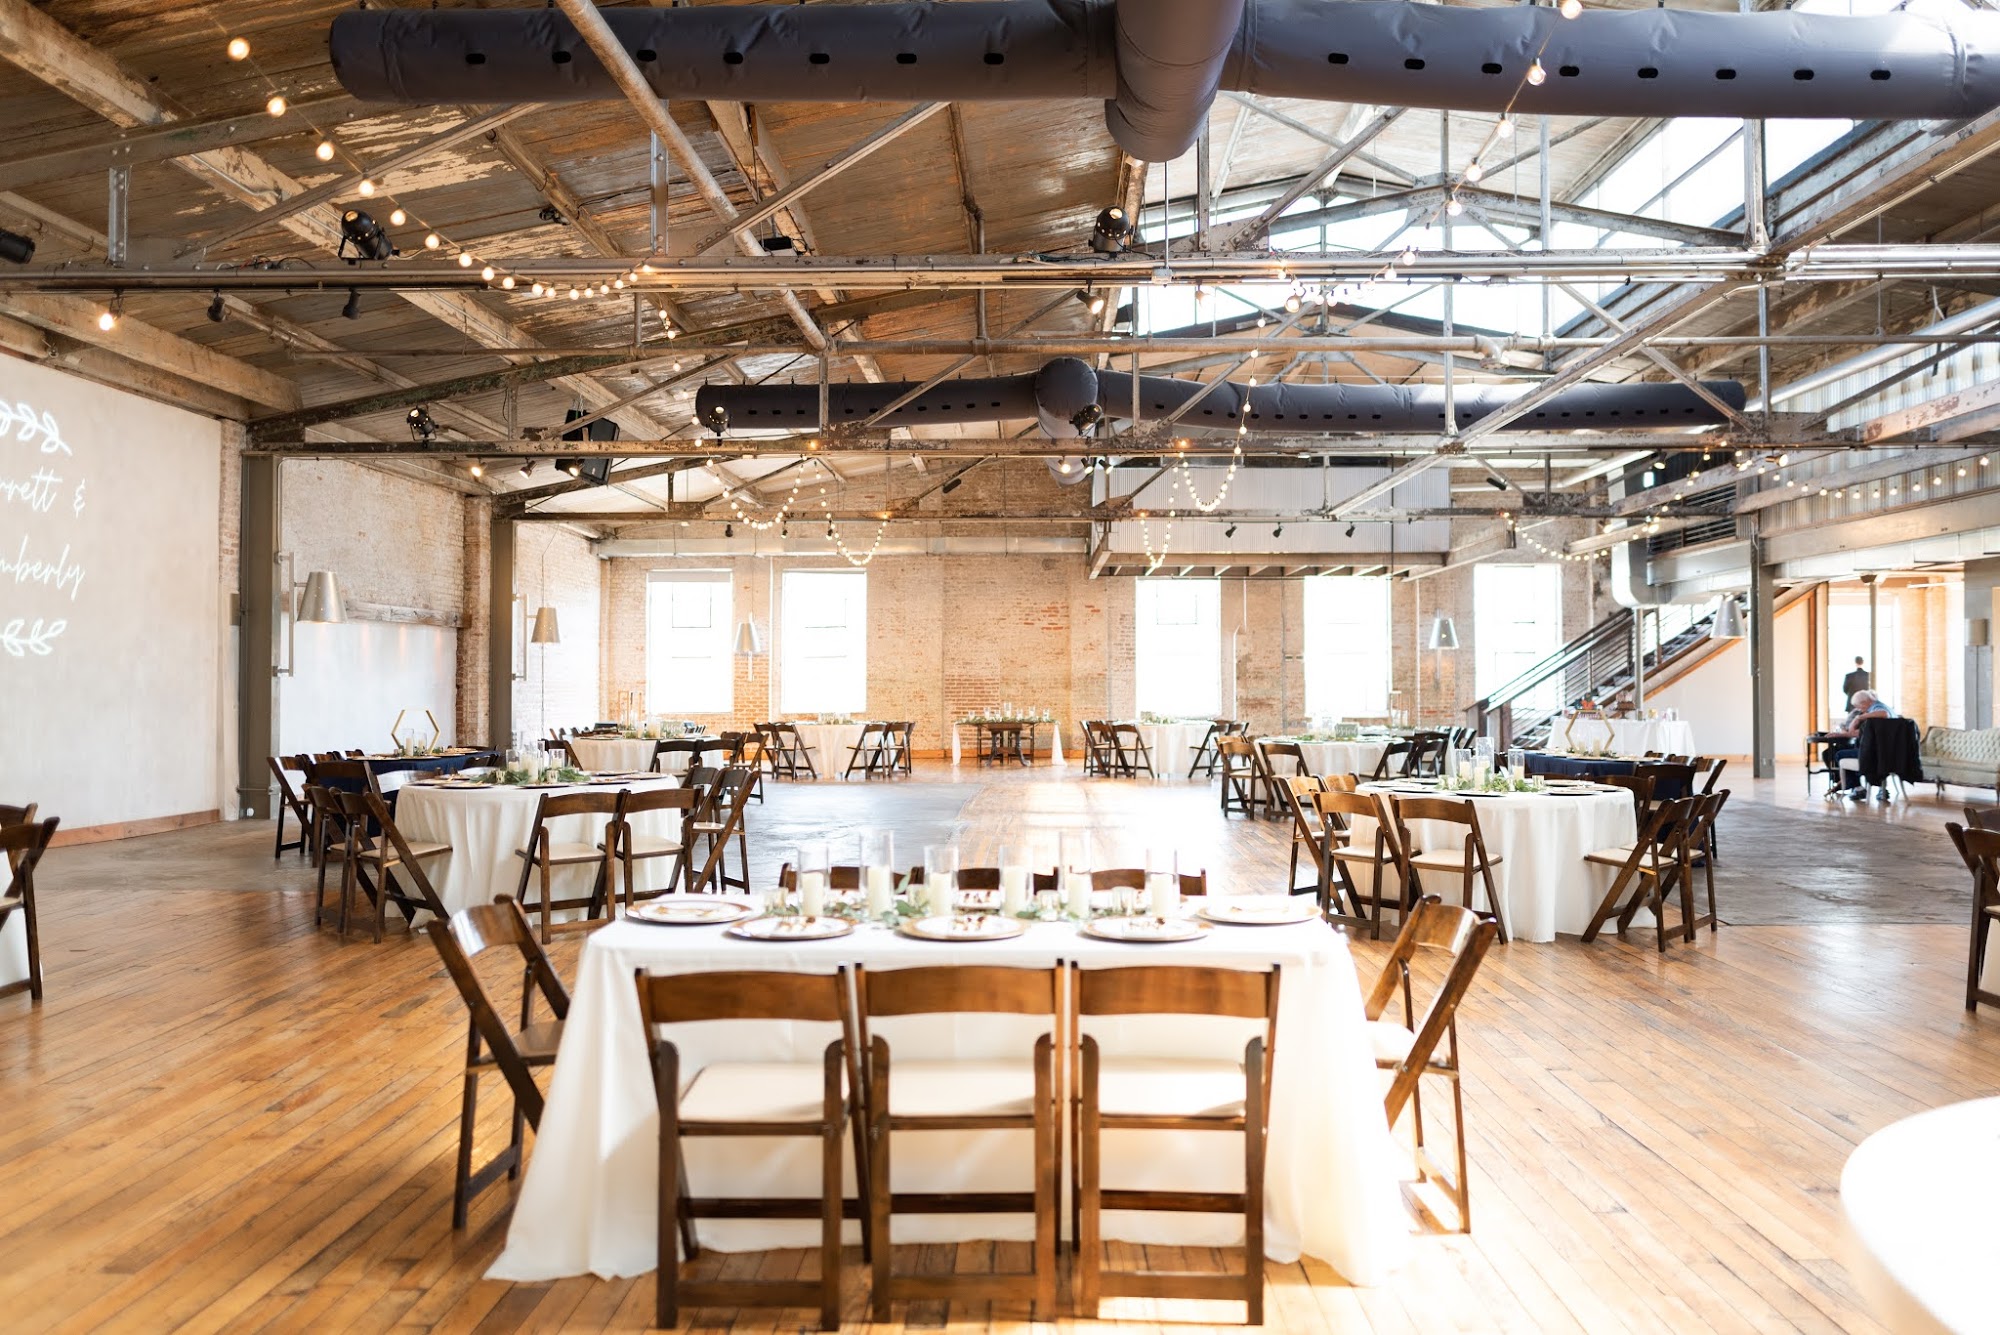 Venue at The Bakery Building